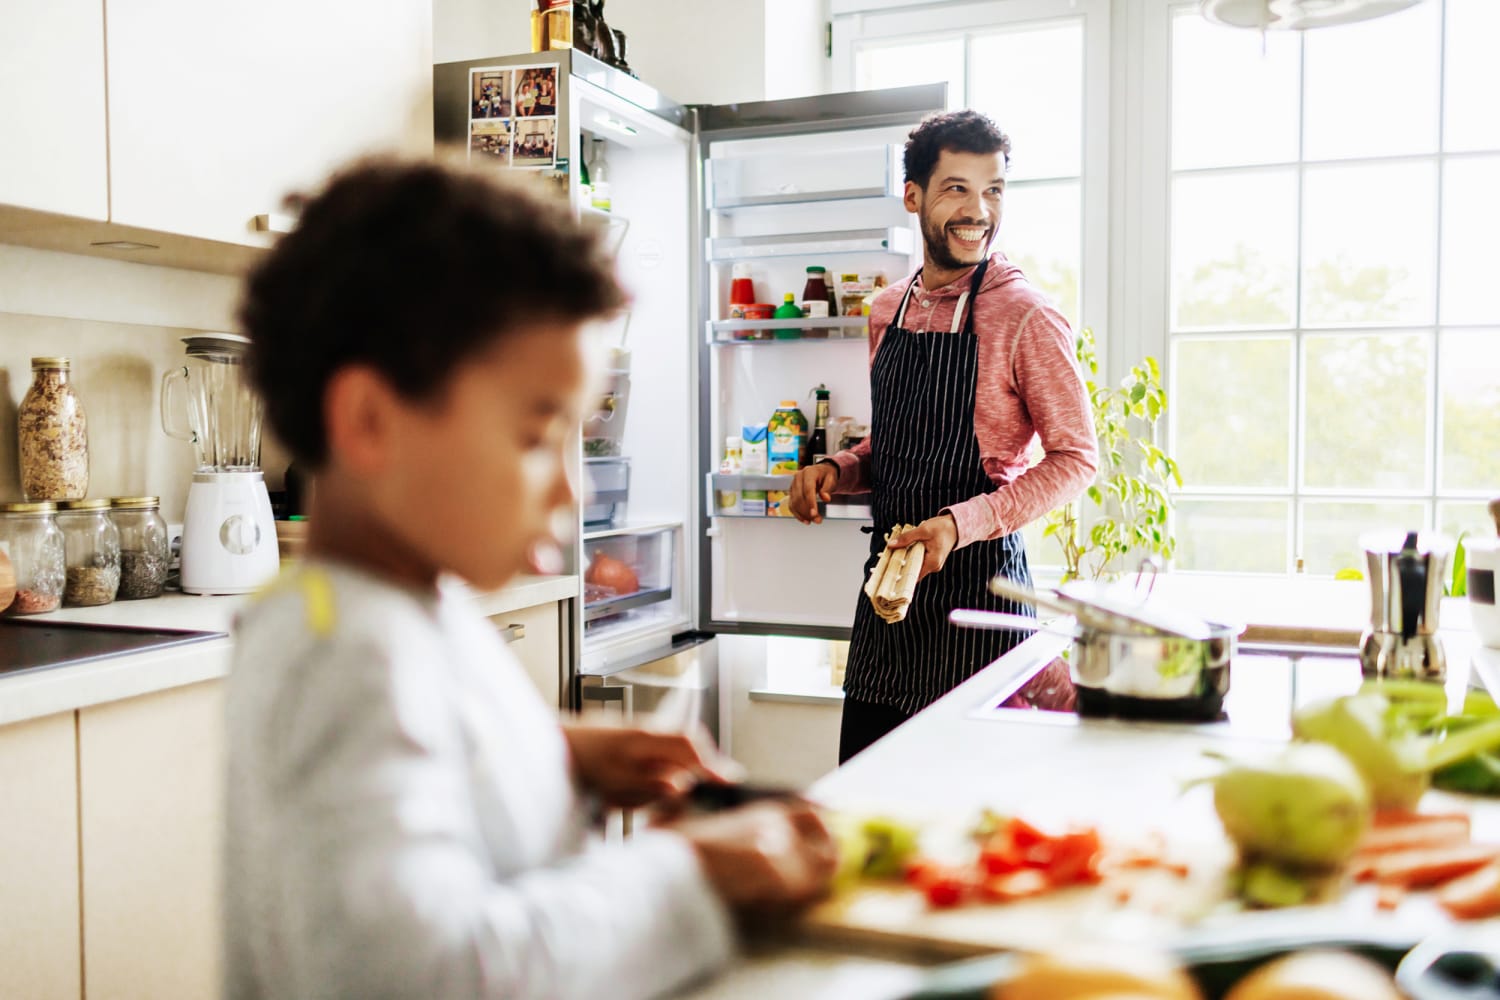 https://media-cldnry.s-nbcnews.com/image/upload/newscms/2020_41/3418710/201008-stock-smiling-dad-son-kitchen-ac-1035p.jpg